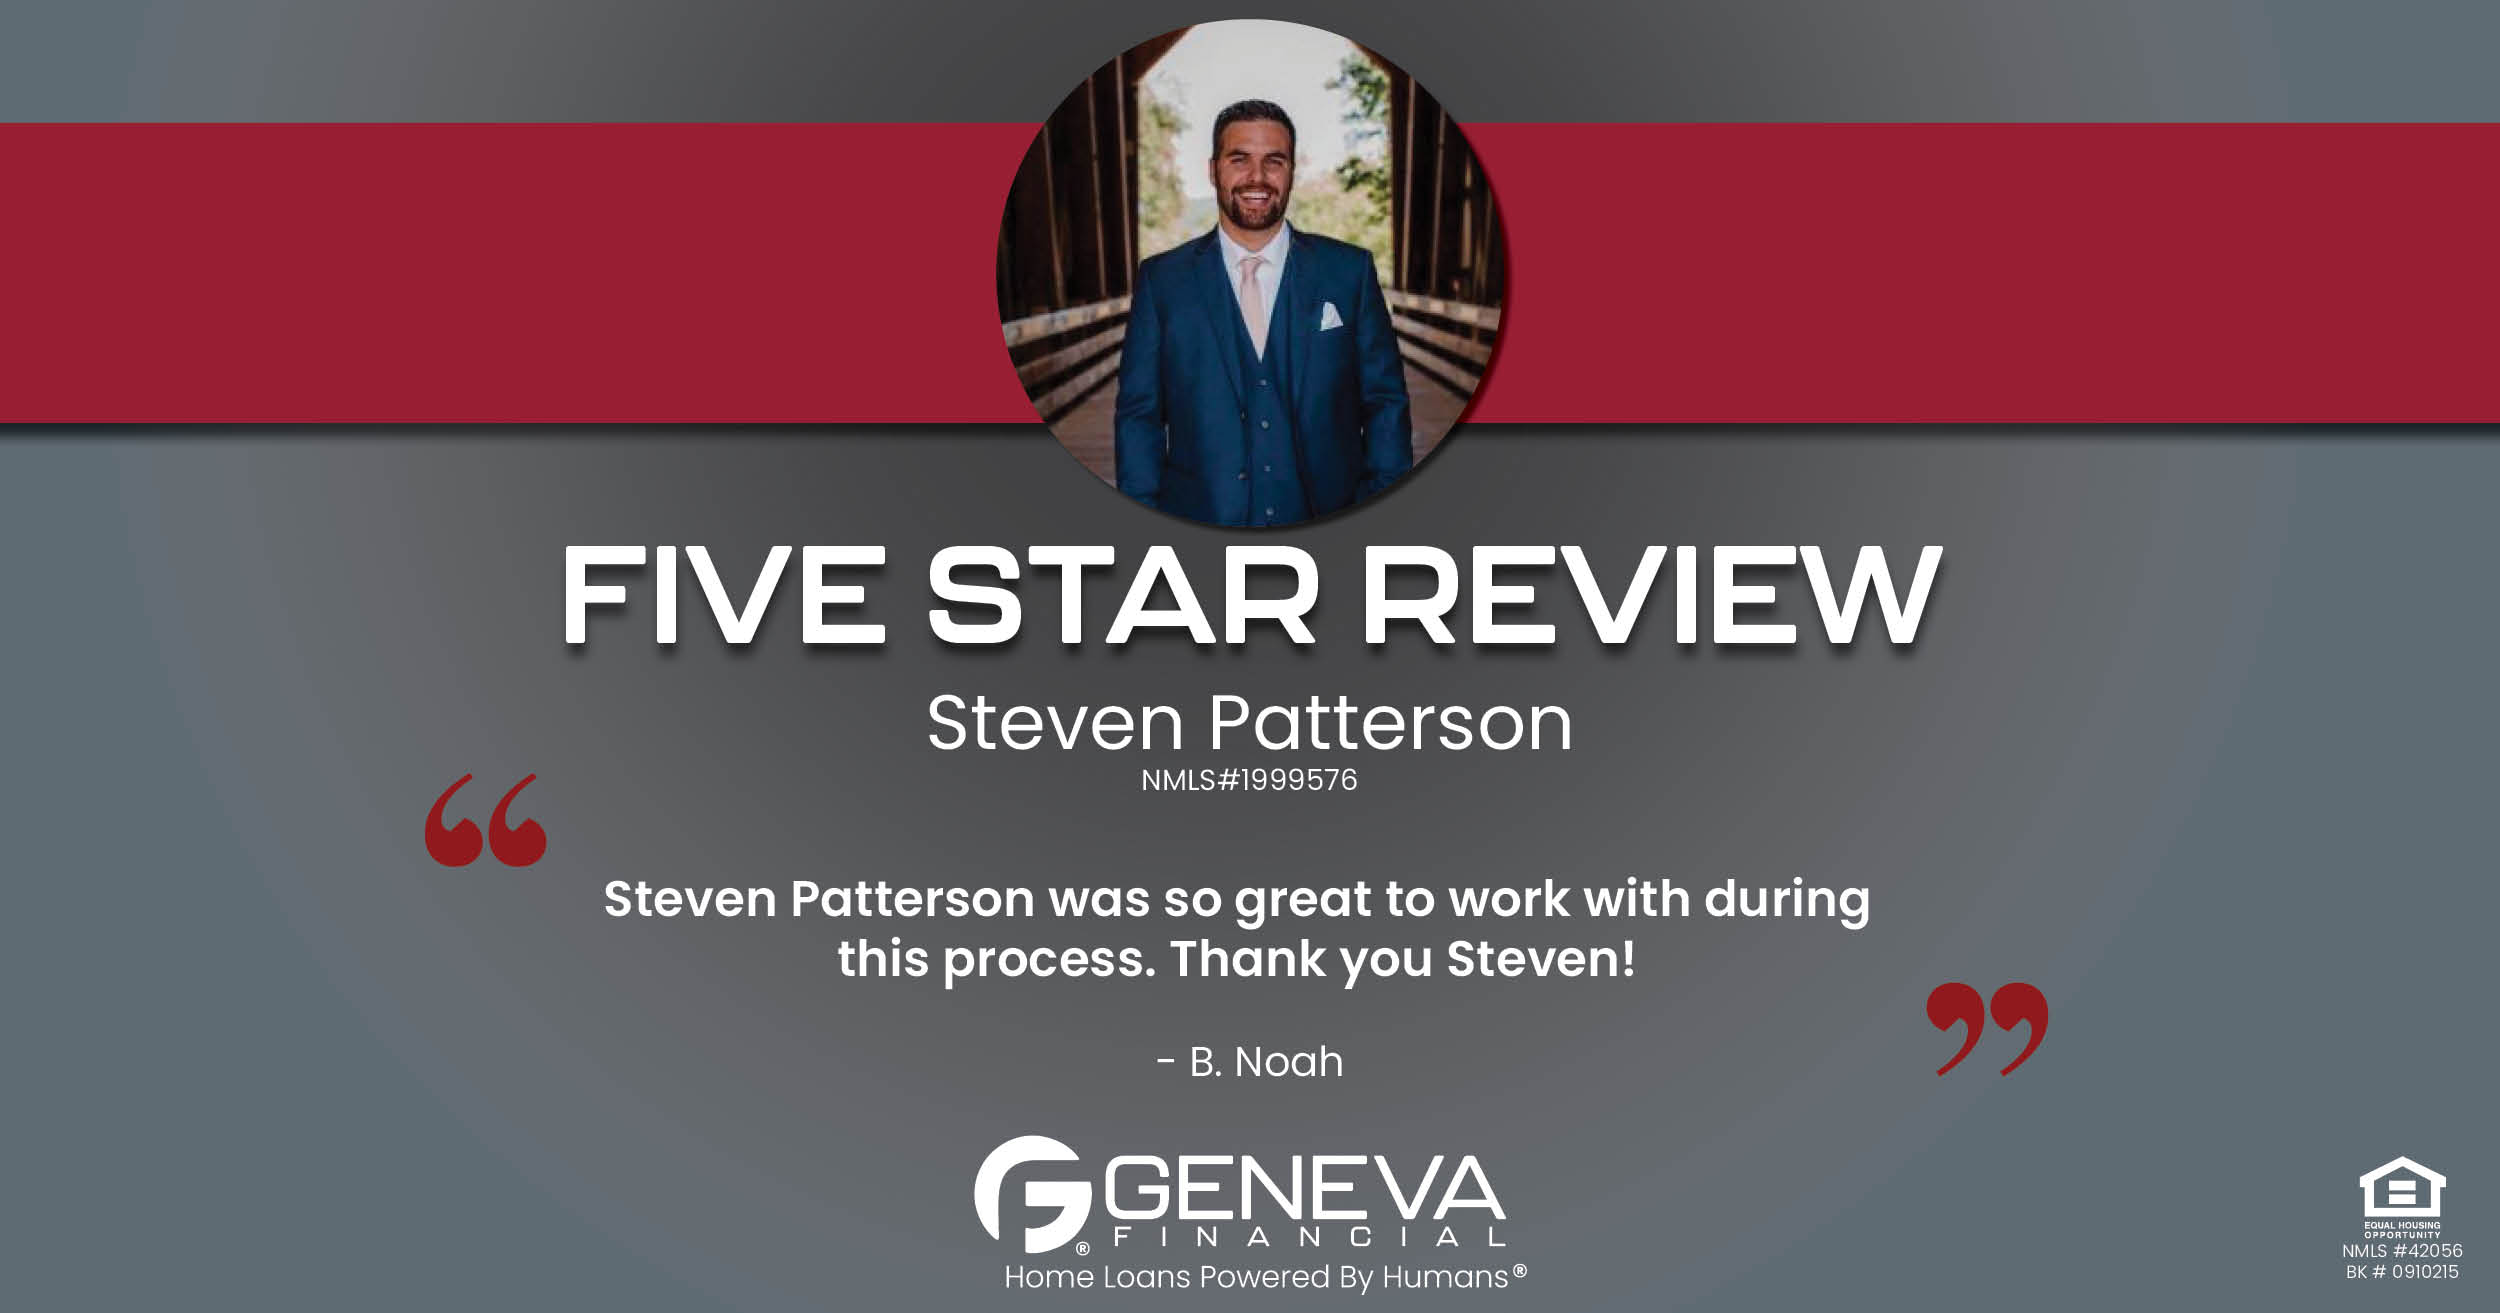 5 Star Review for Steven Patterson, Licensed Mortgage Loan Officer with Geneva Financial, Beaverton, OR – Home Loans Powered by Humans®.